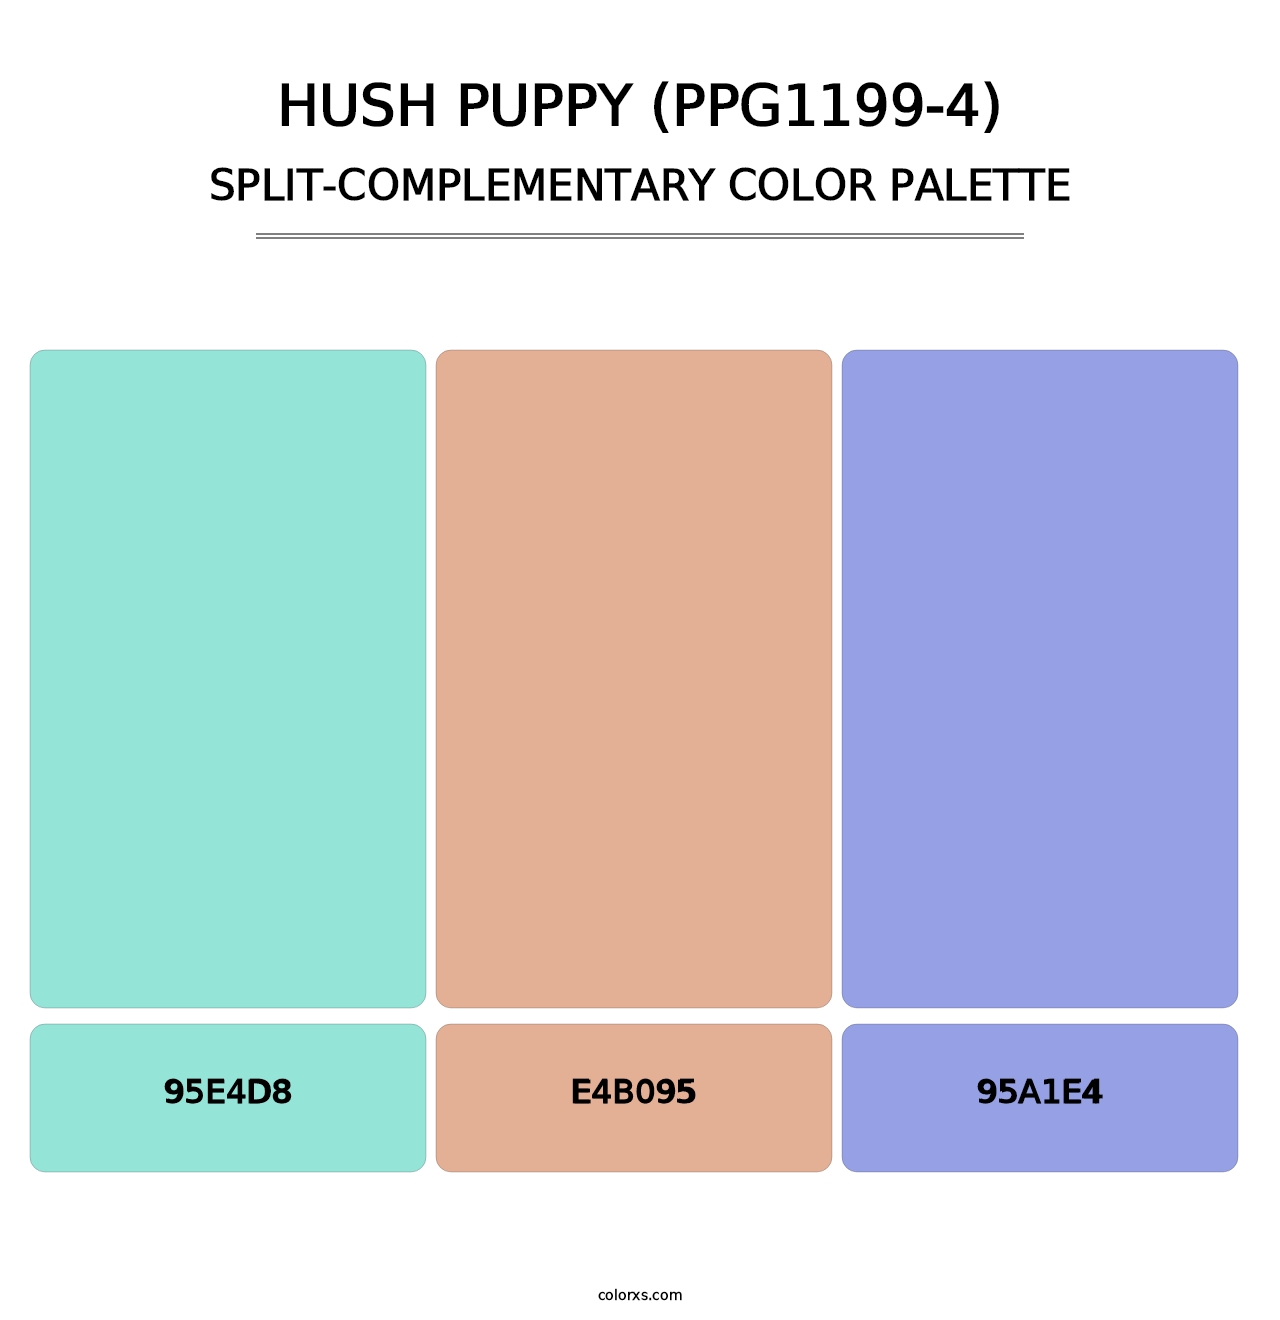 Hush Puppy (PPG1199-4) - Split-Complementary Color Palette